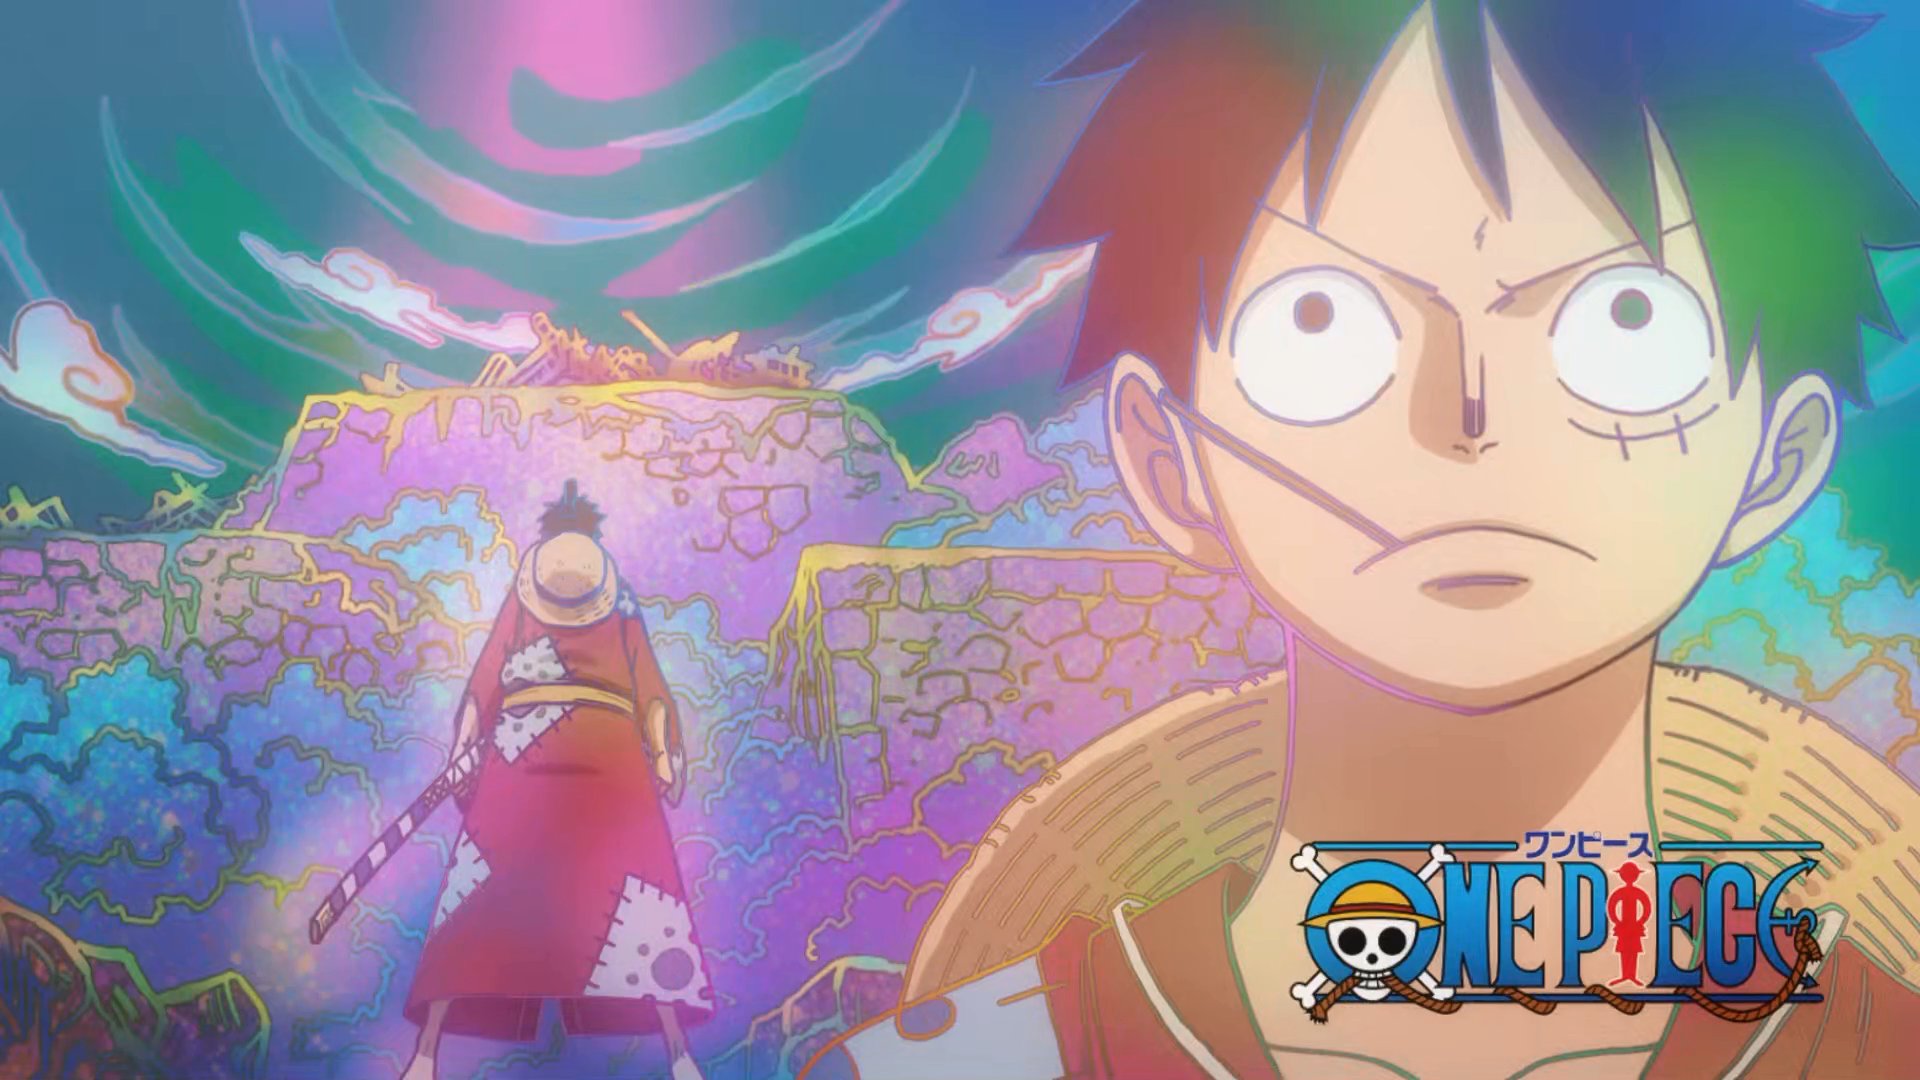 Jօყ Toei Is Really Blessing Us With New Eyecatchers Every Week So I M Gonna Compile All We Have So Far One Piece Episode 960 Eyecatchers Onepiece Onepiece960 Anime T Co Wf1w0gbbfx